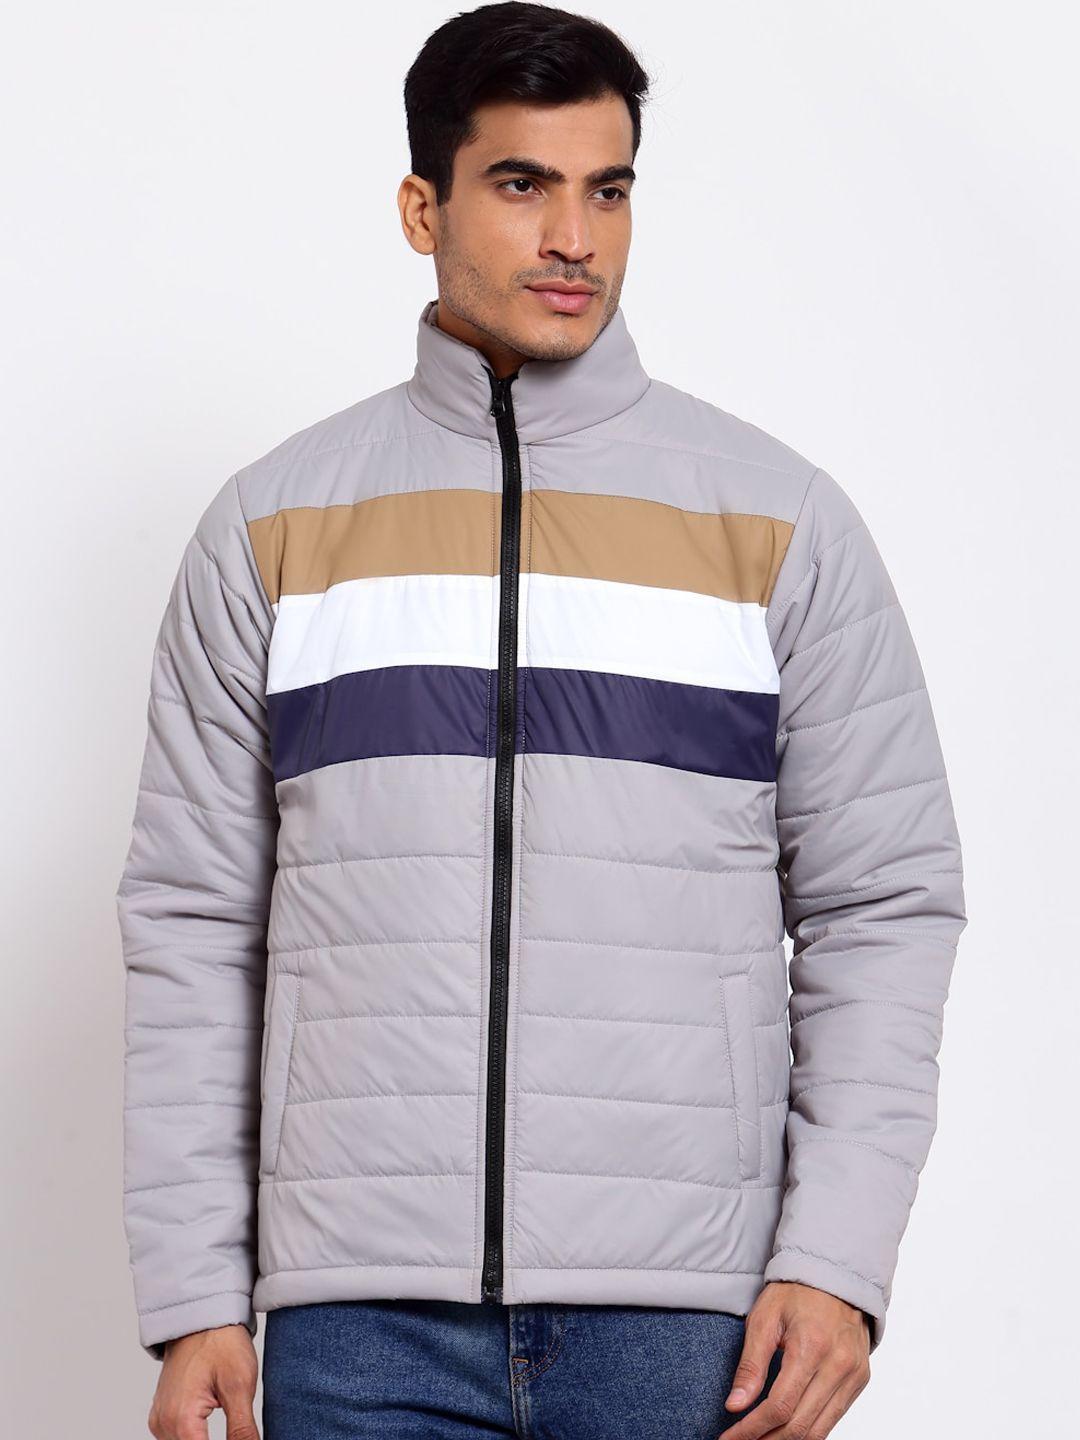 style quotient men grey & navy blue striped lightweight outdoor padded jacket